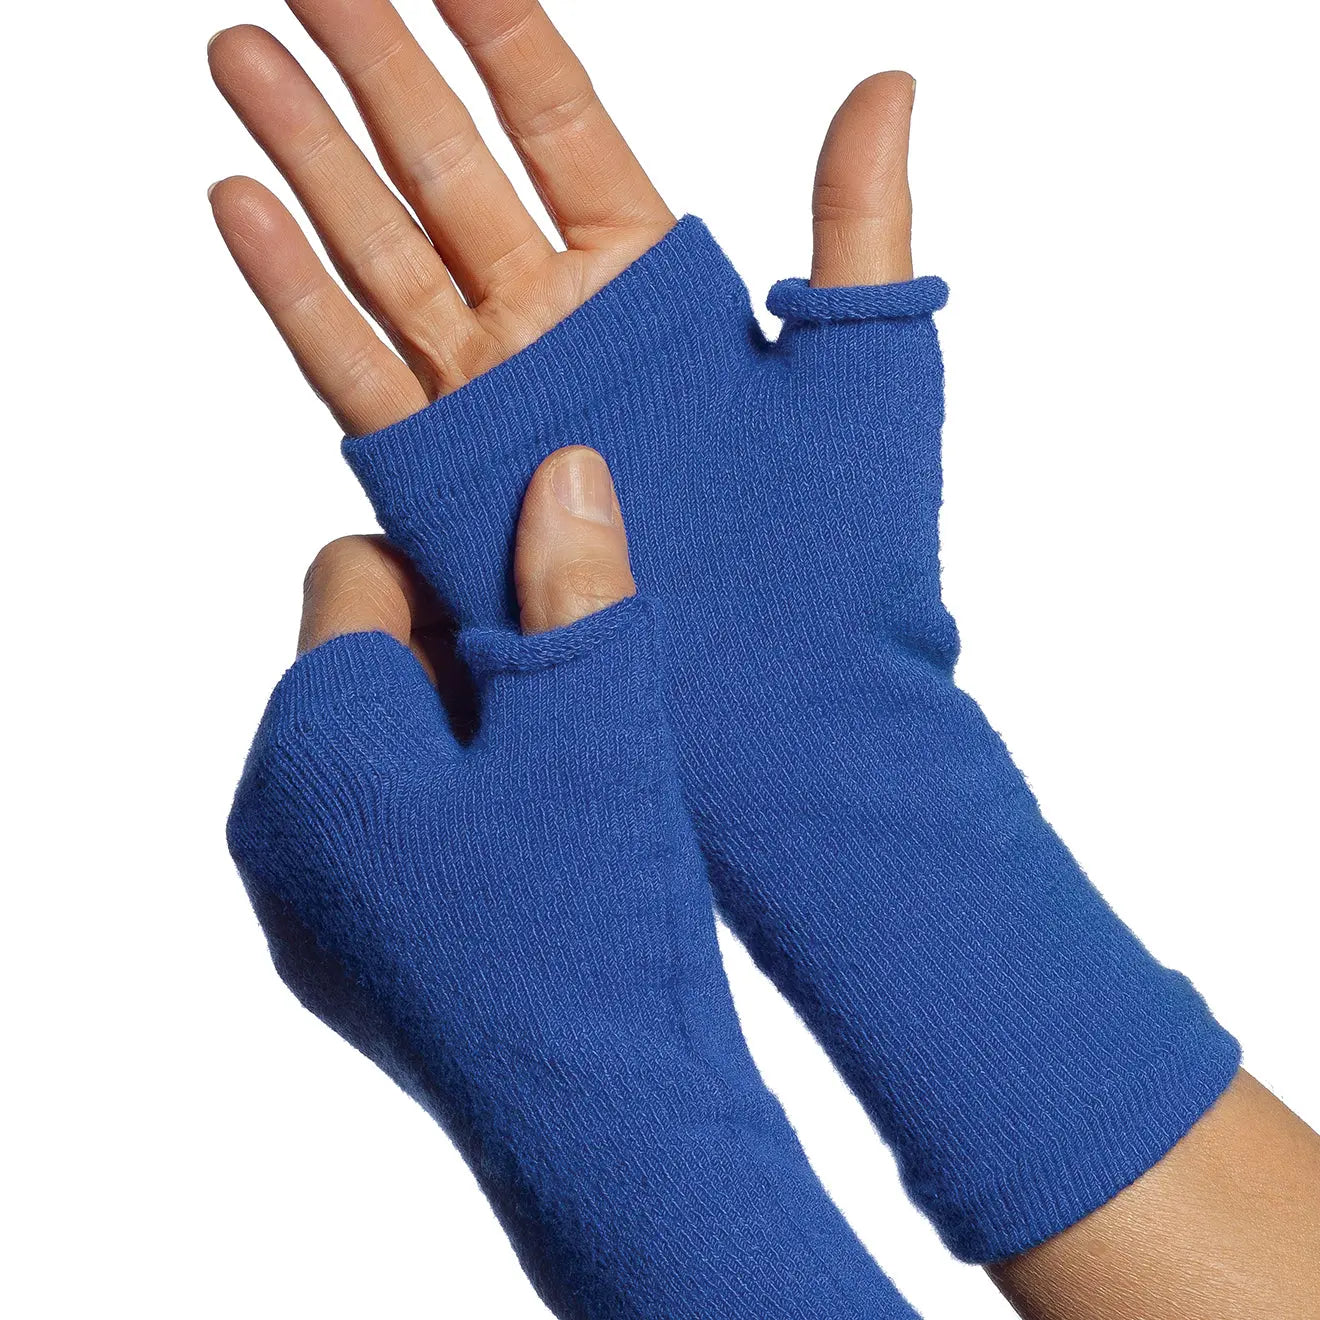 Fingerless Gloves - Protection for Hands (pair) Limbkeepers